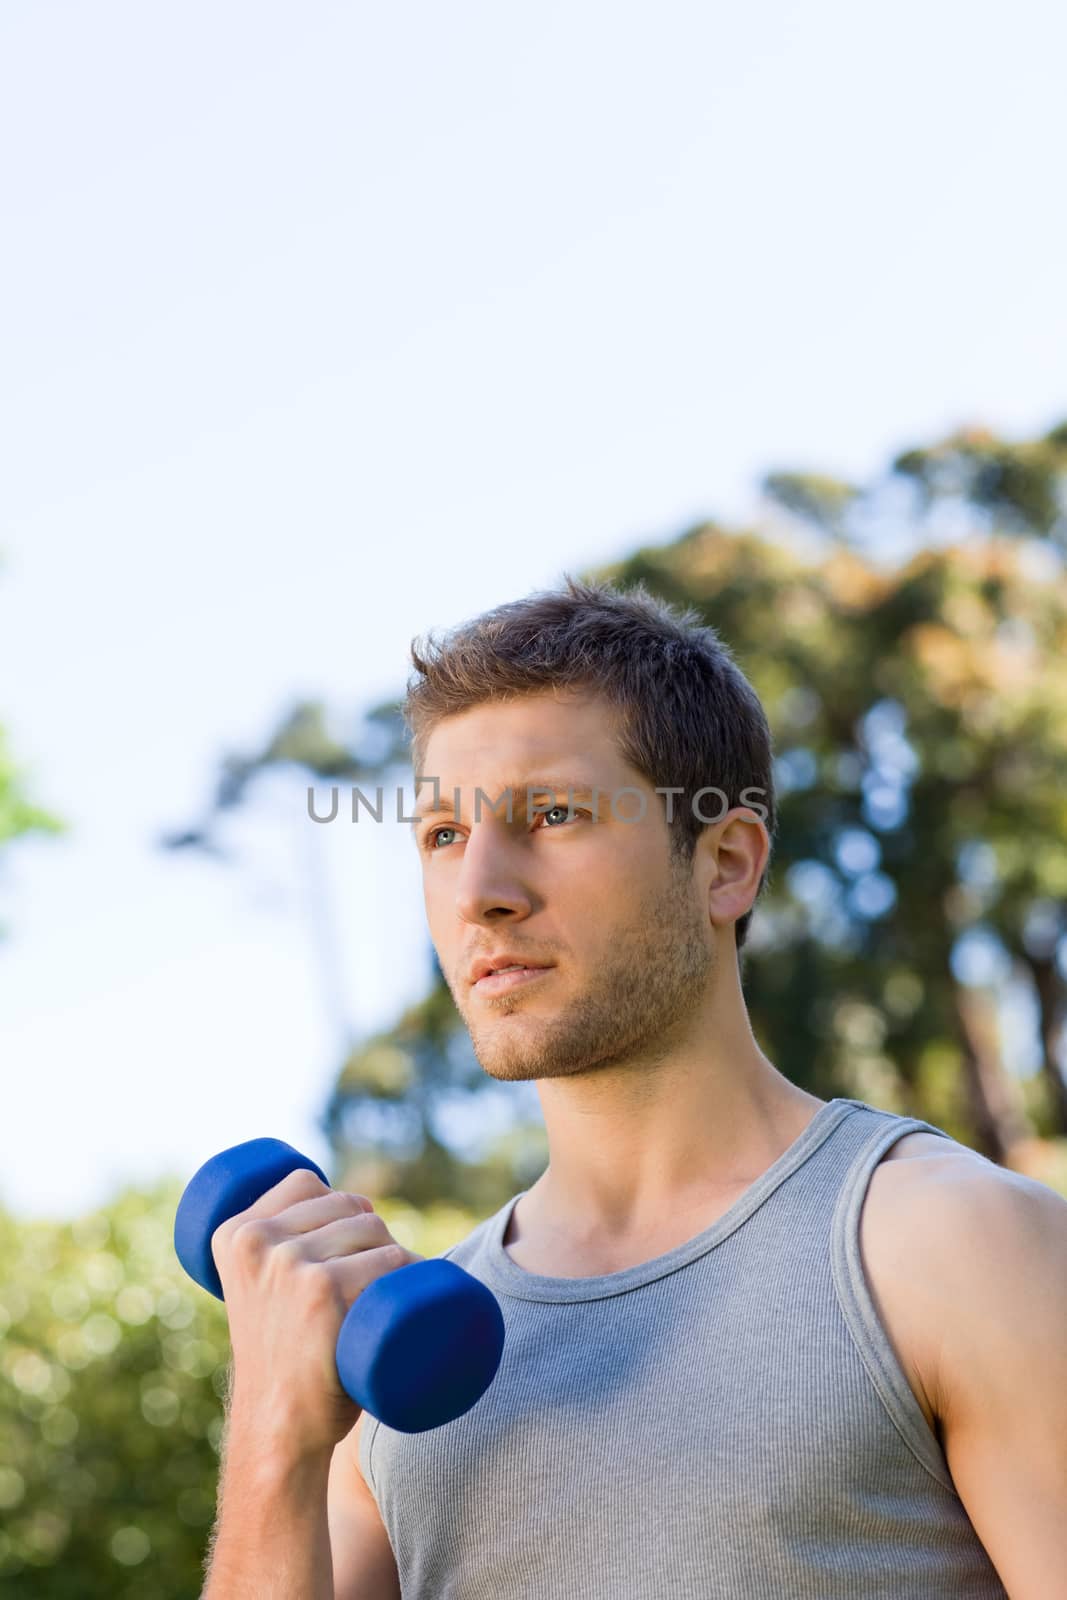 Man doing his exercises in the park during the summer